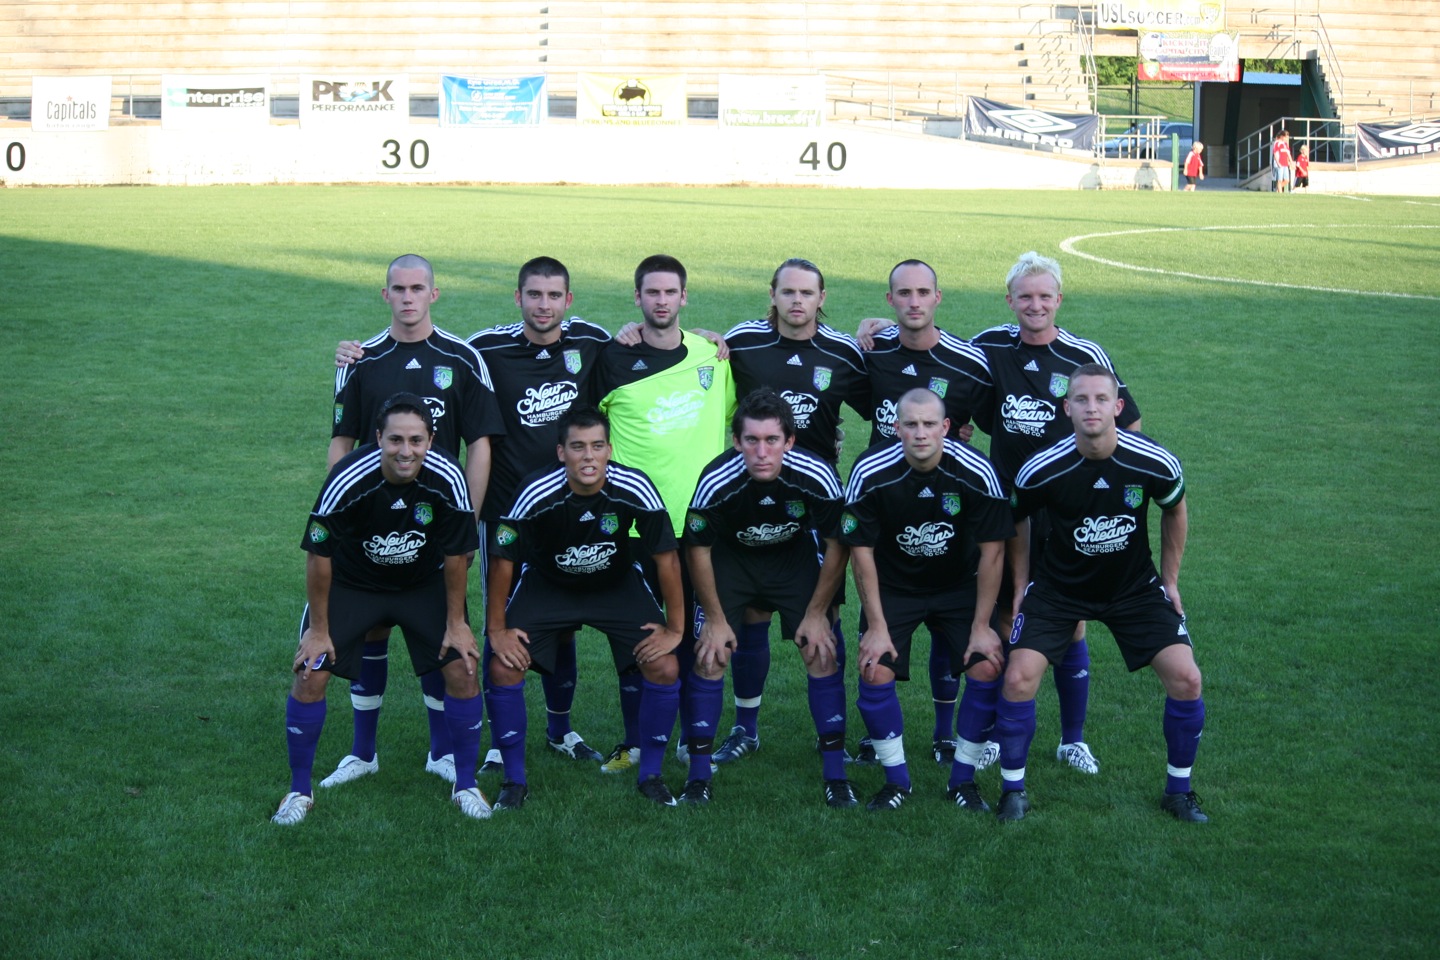 New Orleans Privateers mens soccer team